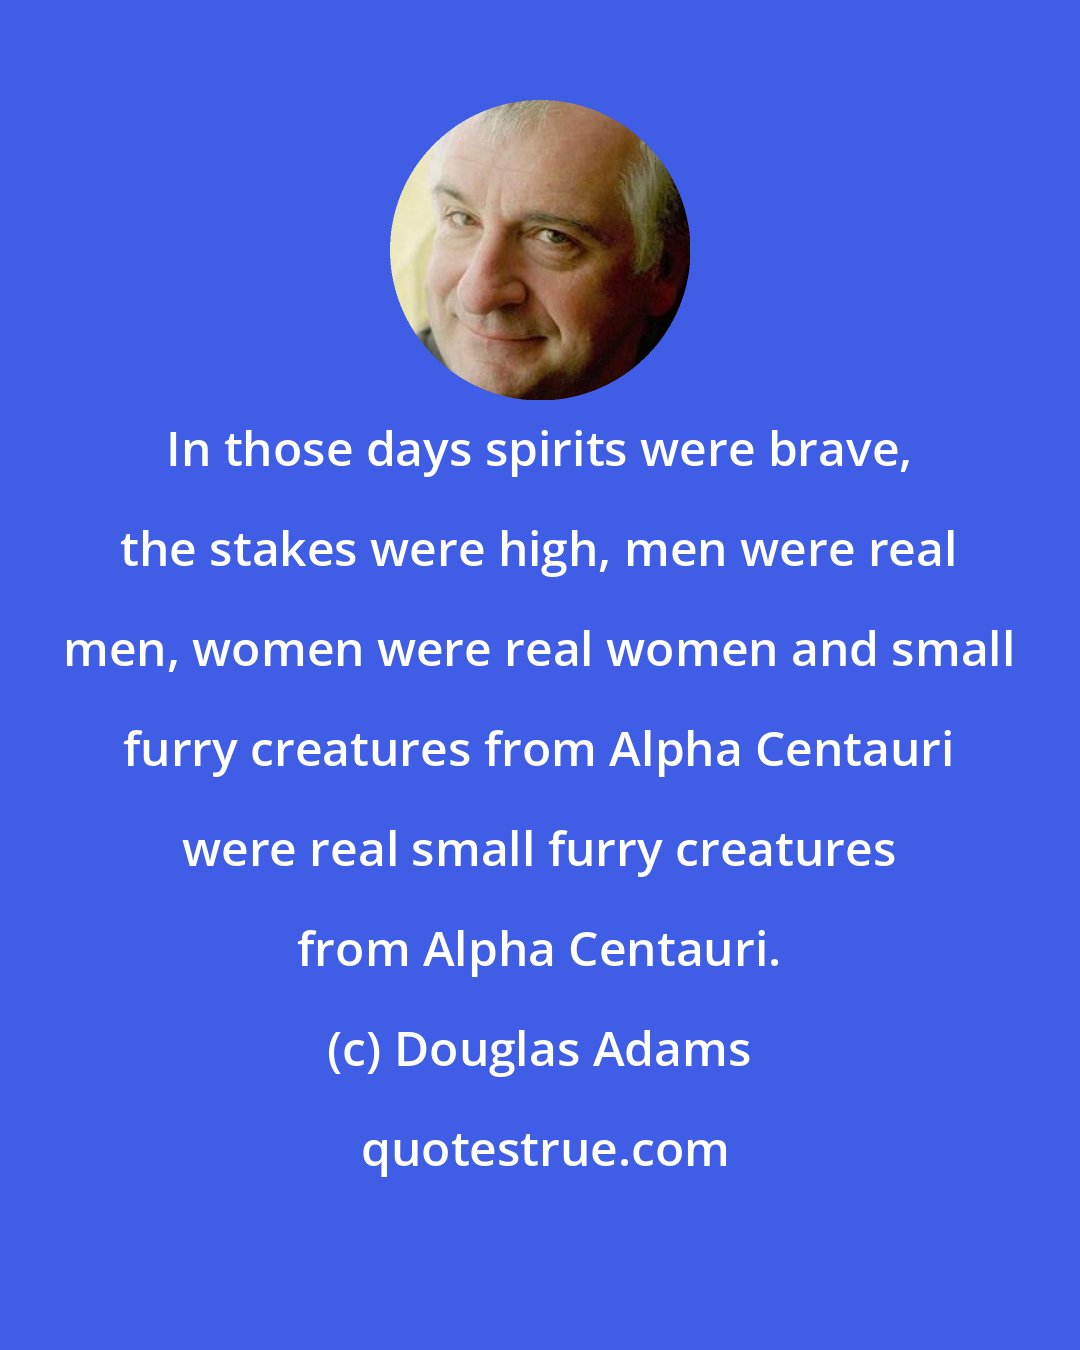 Douglas Adams: In those days spirits were brave, the stakes were high, men were real men, women were real women and small furry creatures from Alpha Centauri were real small furry creatures from Alpha Centauri.